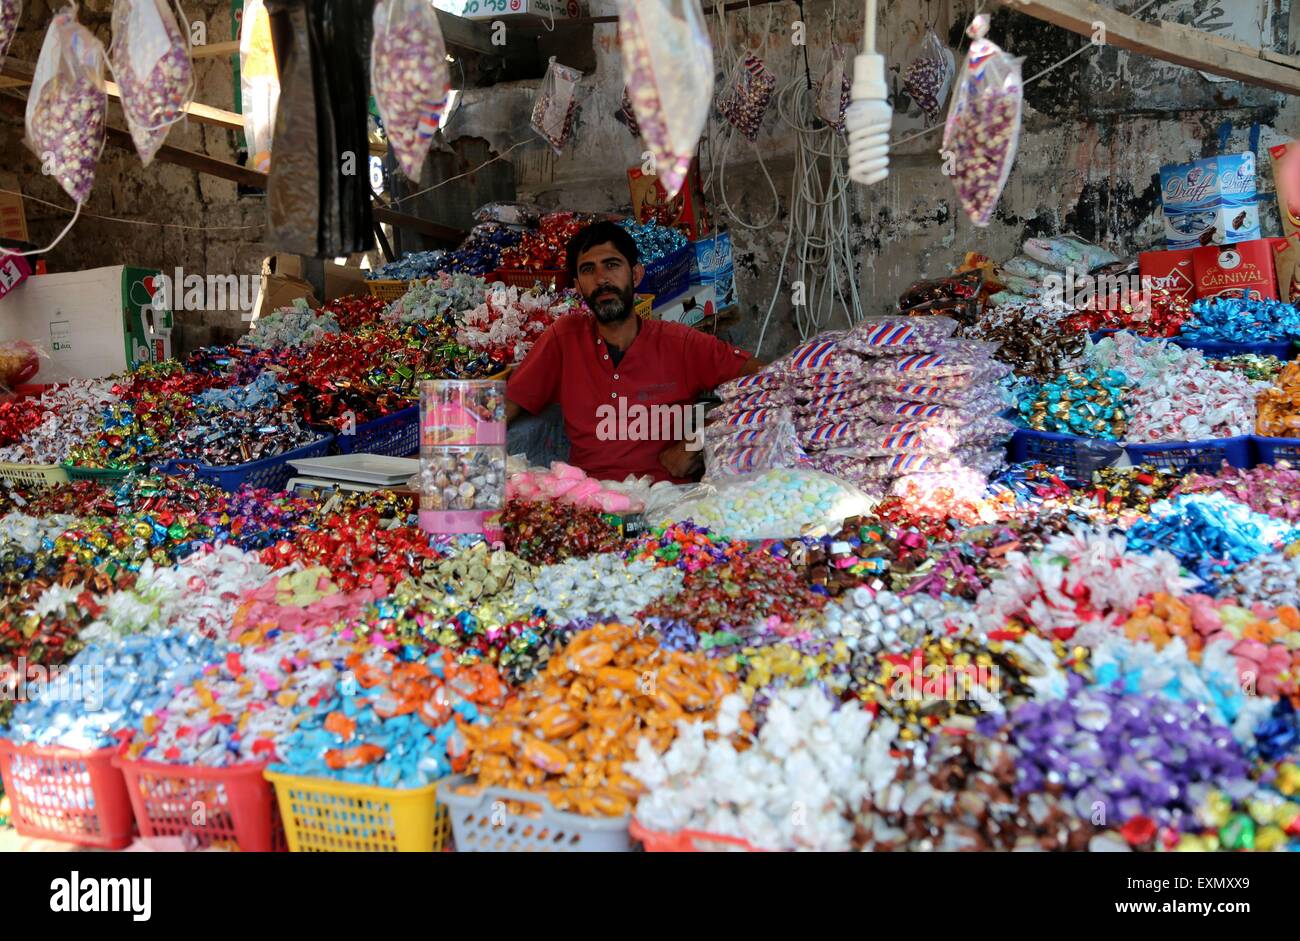 Gaza, Palestine. 15th July, 2015. Palestinians shop in a market for the Eid al-Fitr, a three-day holiday that marks the end of the fasting month of Ramadan, in Gaza city. Muslims all over the world prepare to celebrate Eid al-Fitr, starting with the with the sighting of the new moon, to mark the end of the fasting month of Ramadan. © Nidal Alwaheidi/Pacific Press/Alamy Live News Stock Photo